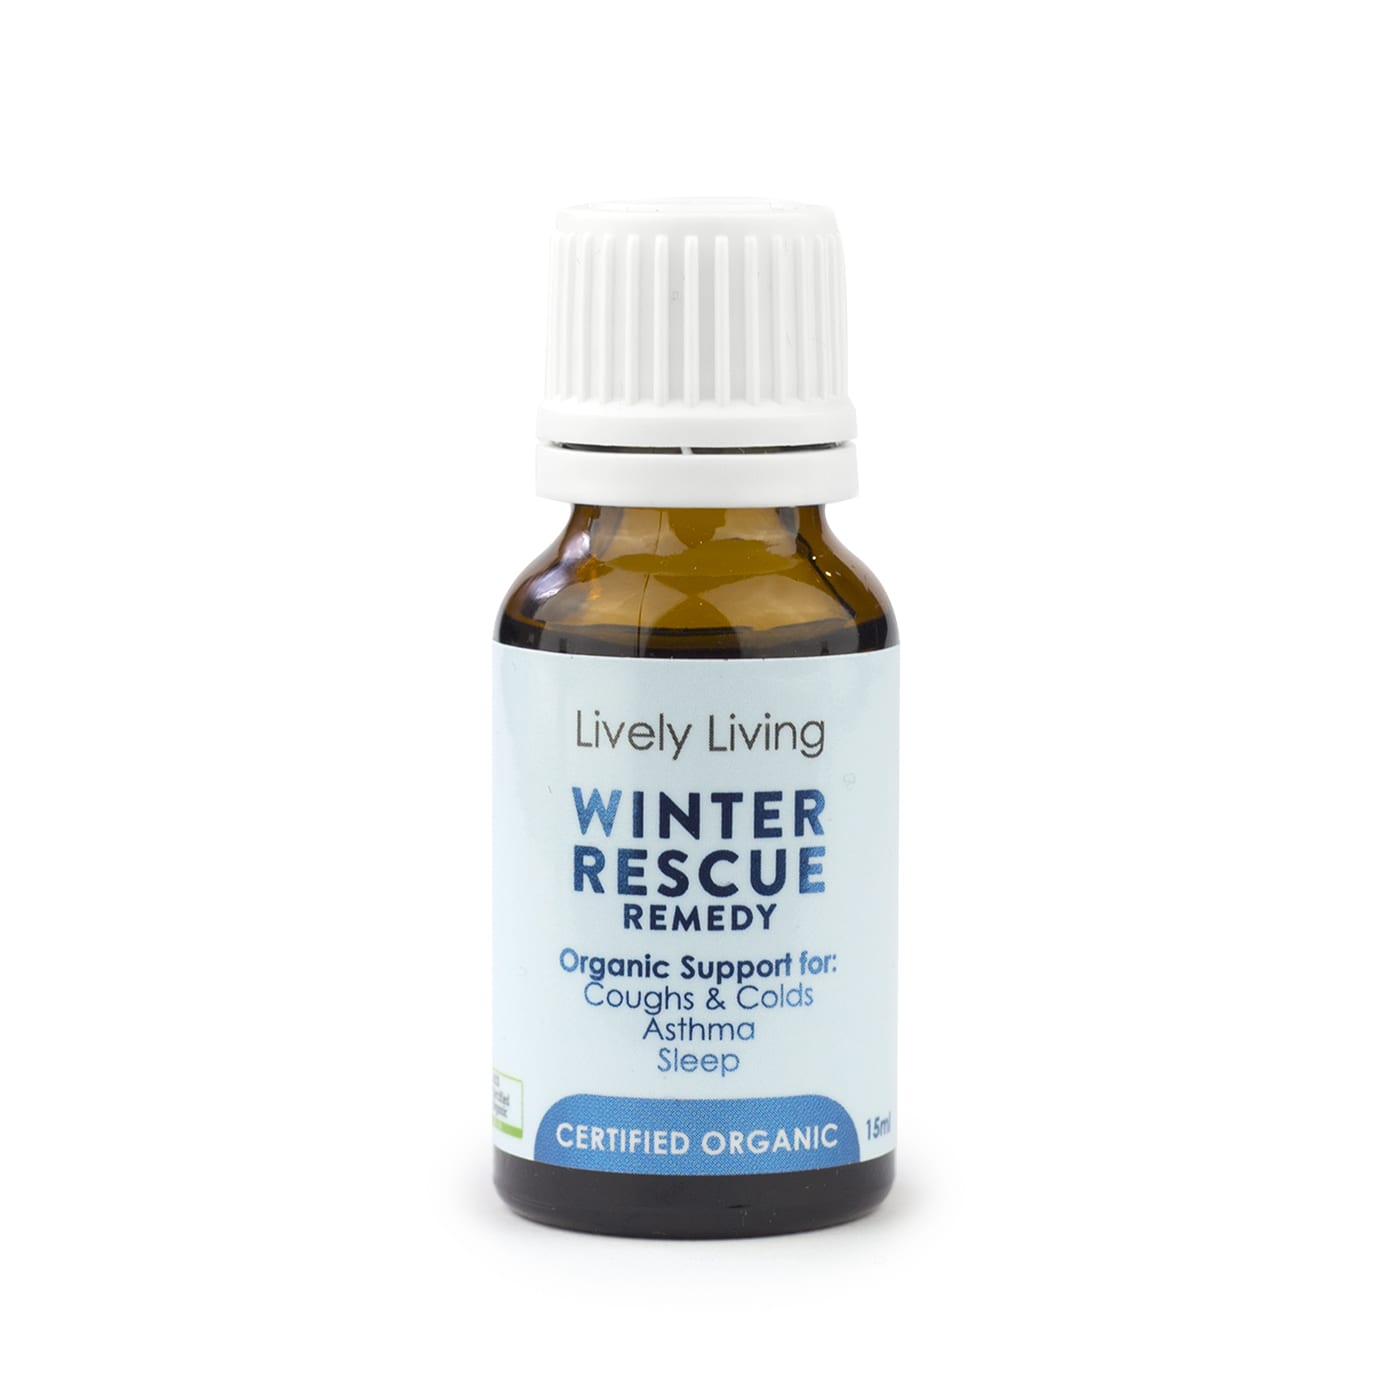 Lively Living Winter Rescue Remedy - 100% Certified Organic Essential Oil 15ml